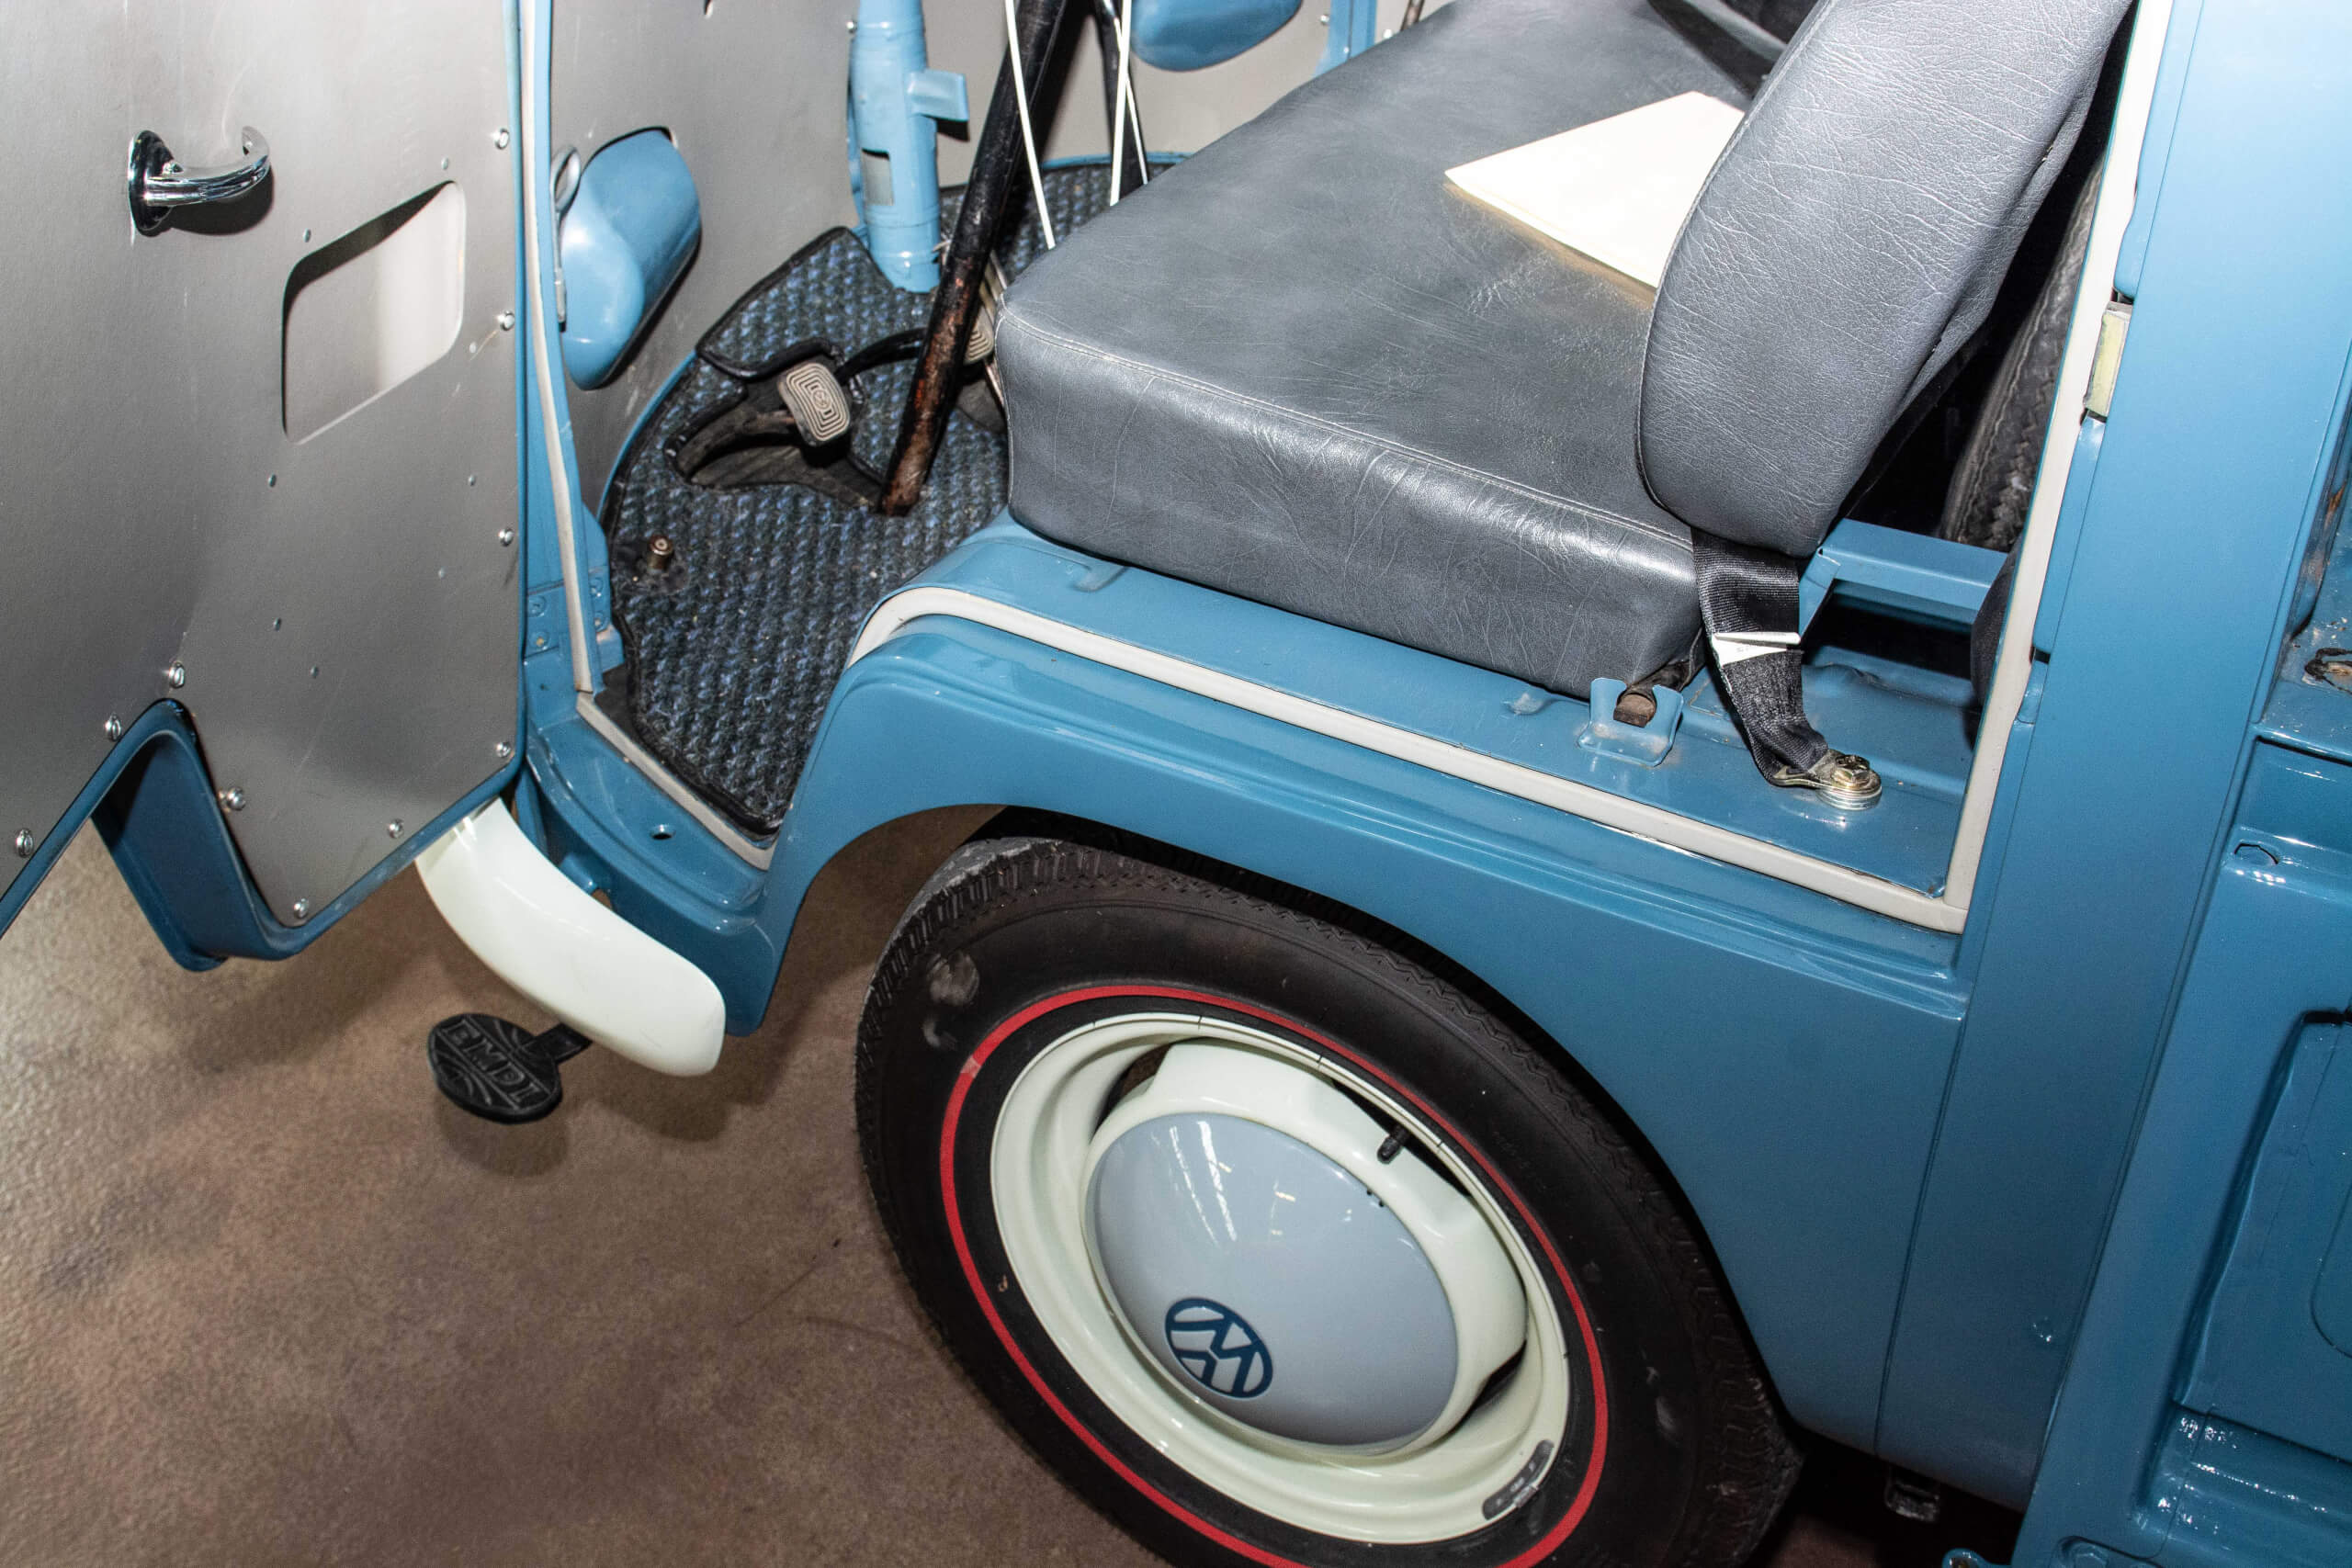 This 1959 VW transport truck features a unique bed.